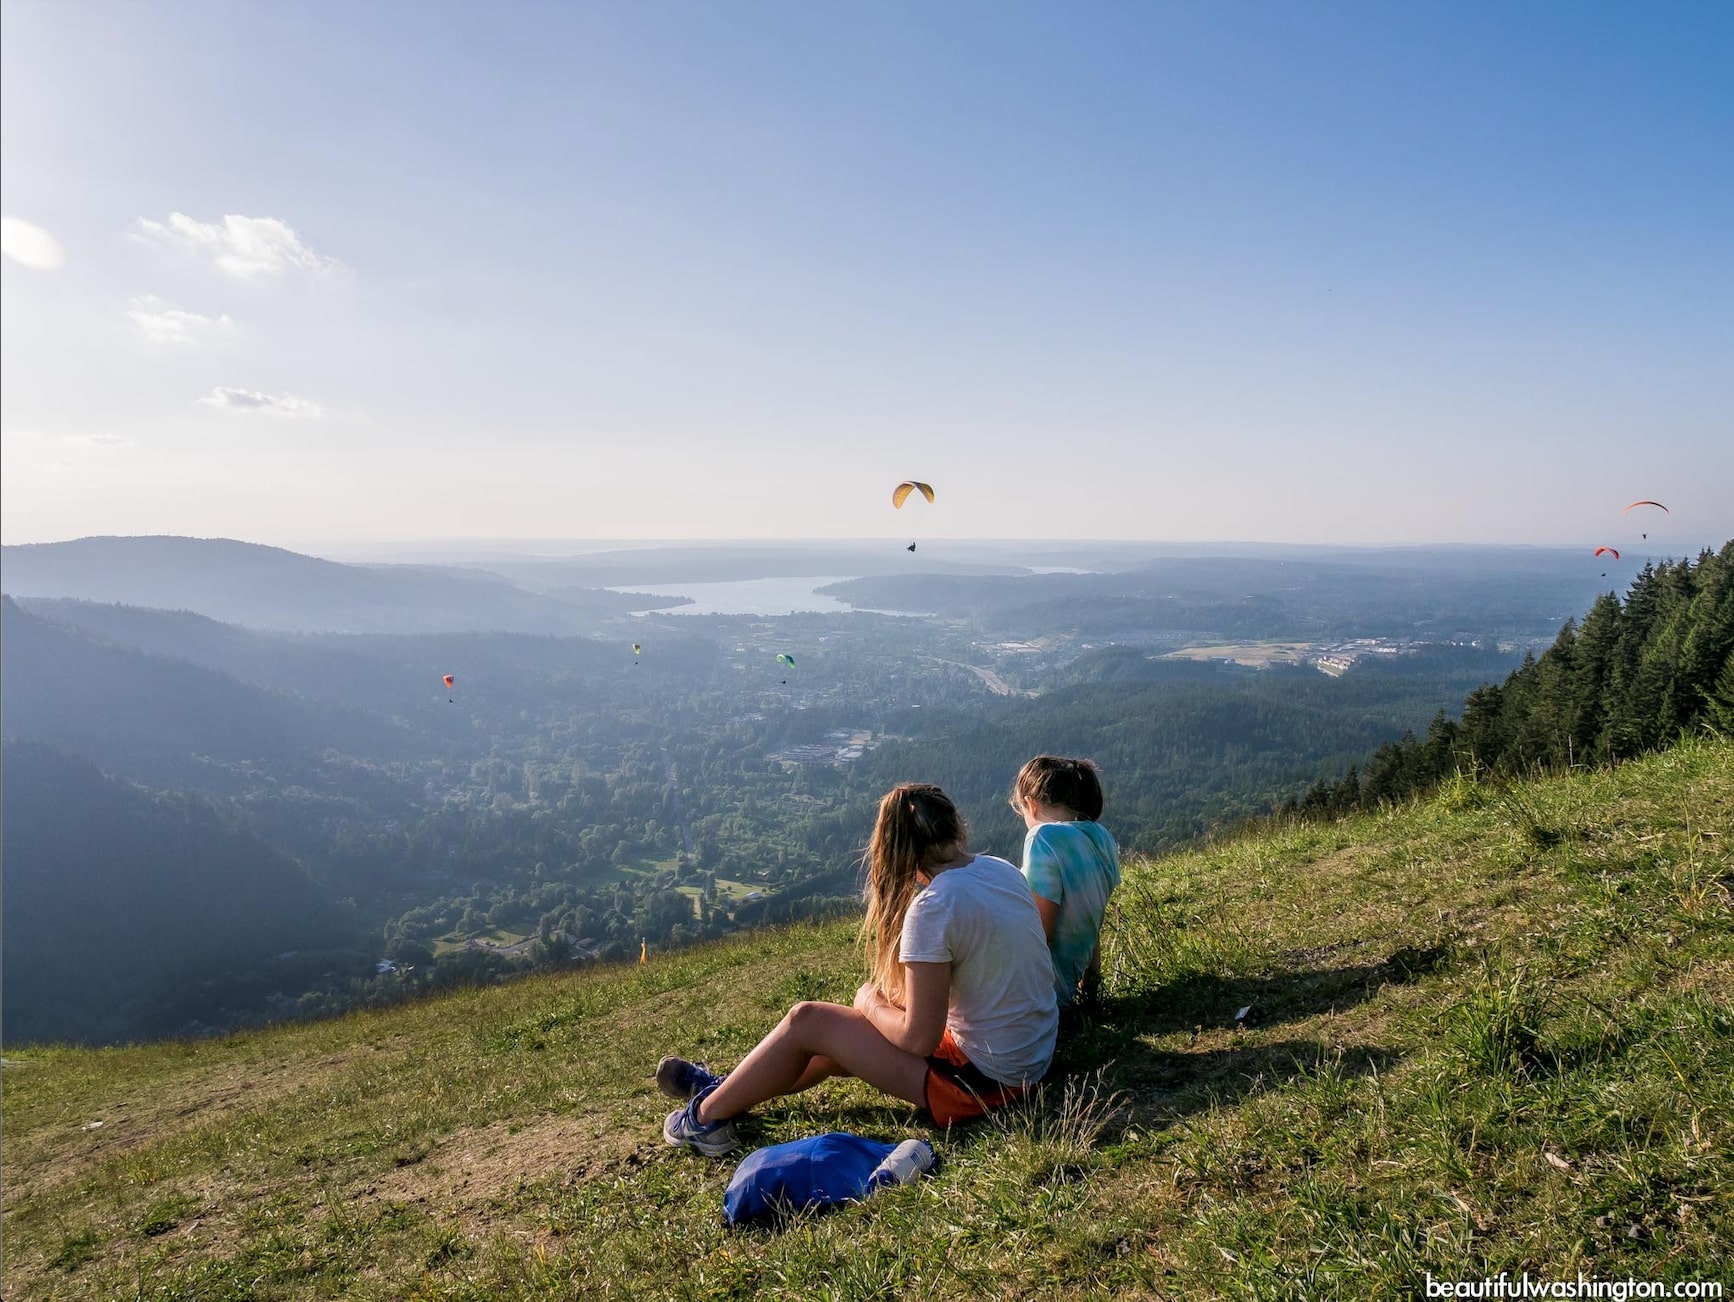 Two women watching paragliders